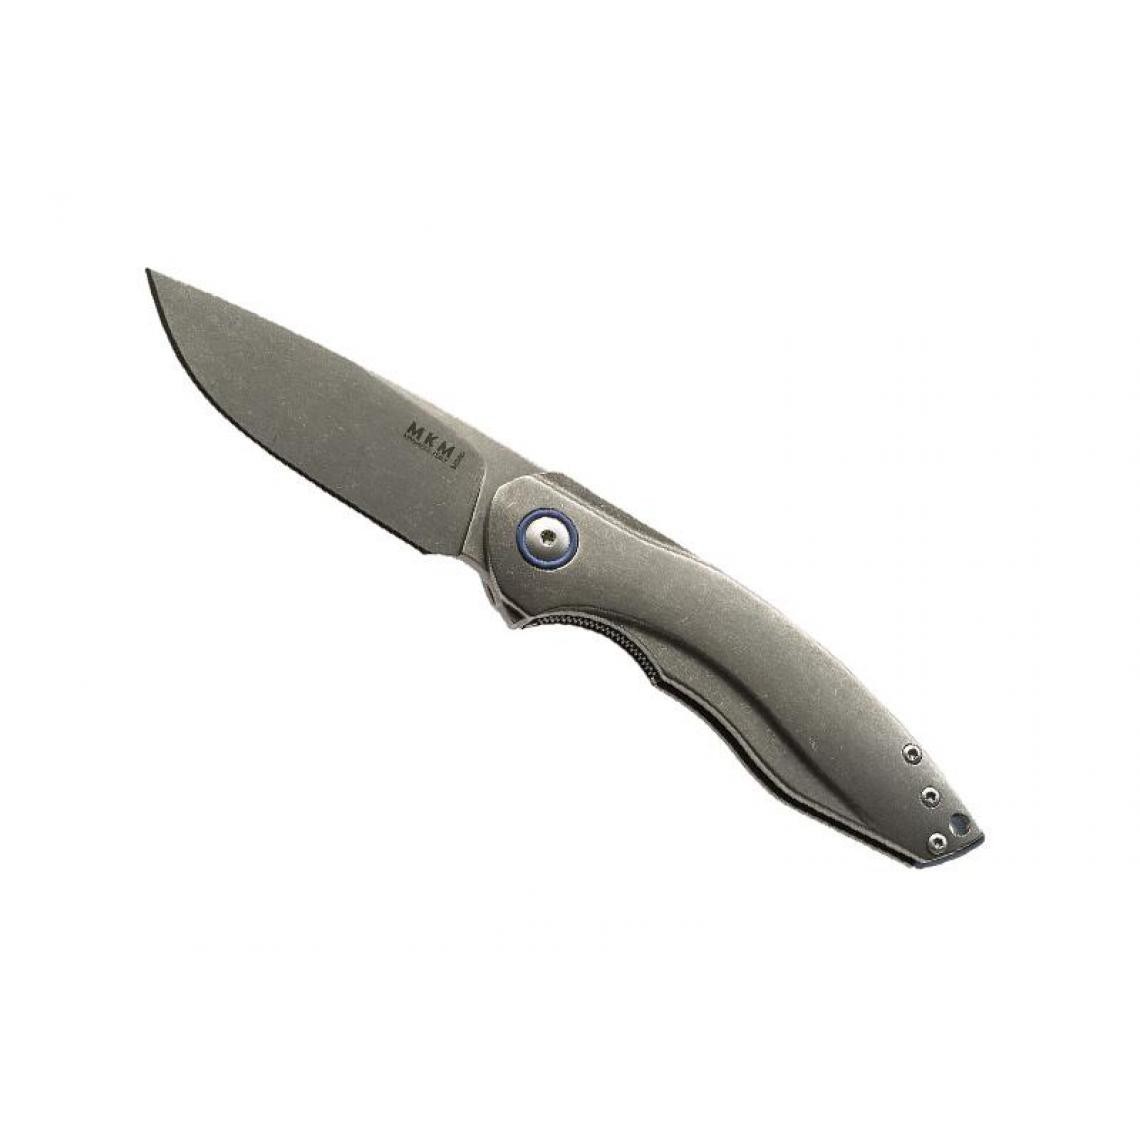 Divers Marques - MKM - MK.VP02TSW - COUTEAU MKM TIMAVO BY VIPER TITANIUM STONEWASHED - Outils de coupe